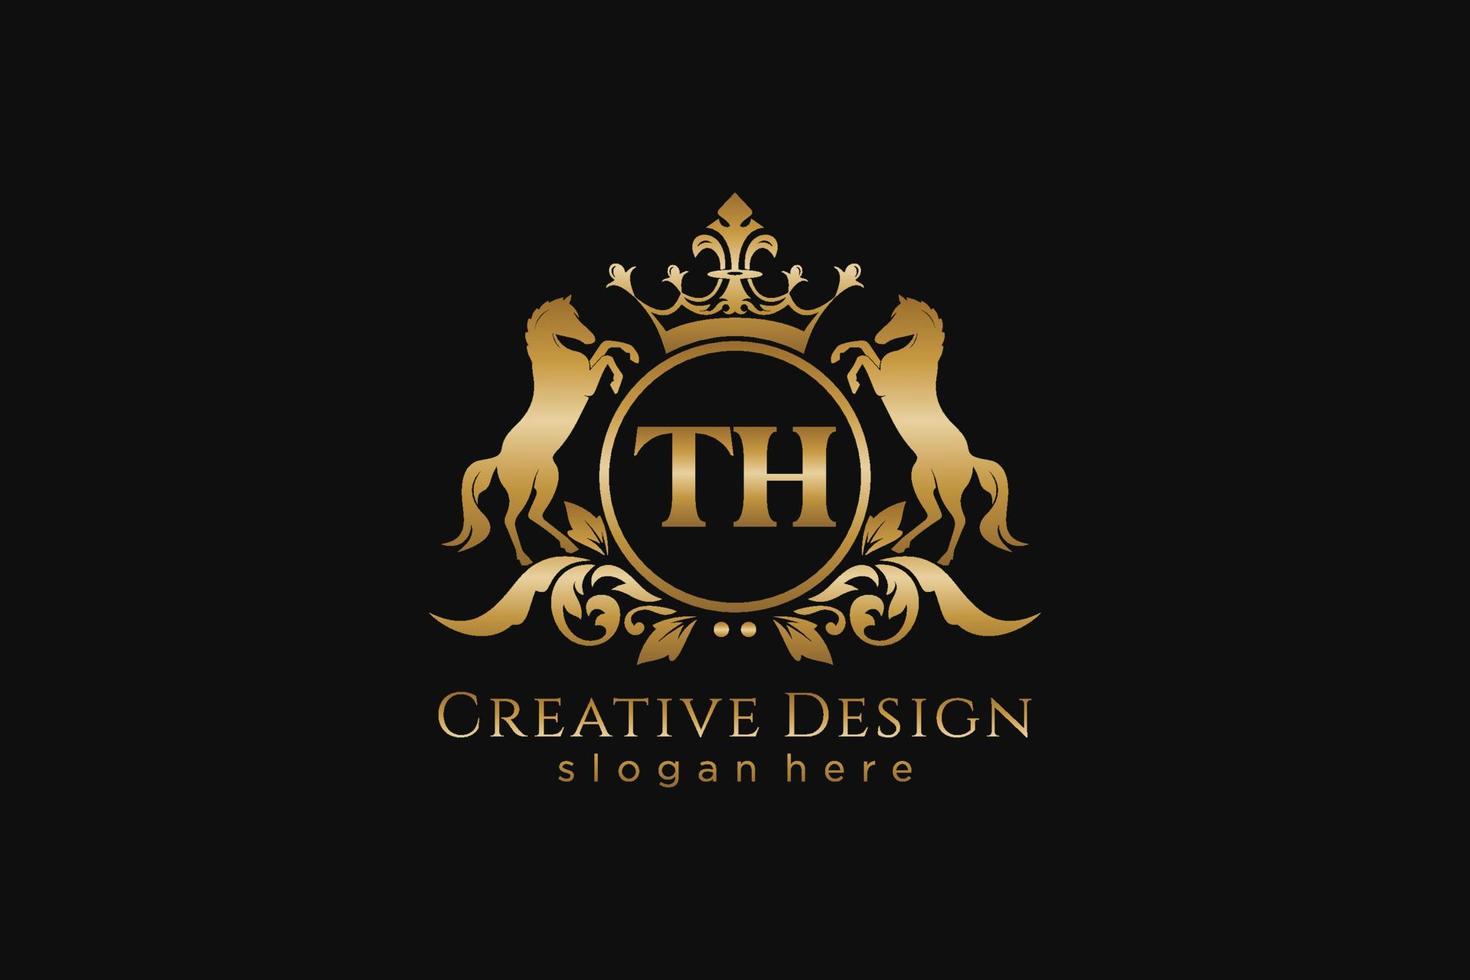 initial TH Retro golden crest with circle and two horses, badge template with scrolls and royal crown - perfect for luxurious branding projects vector